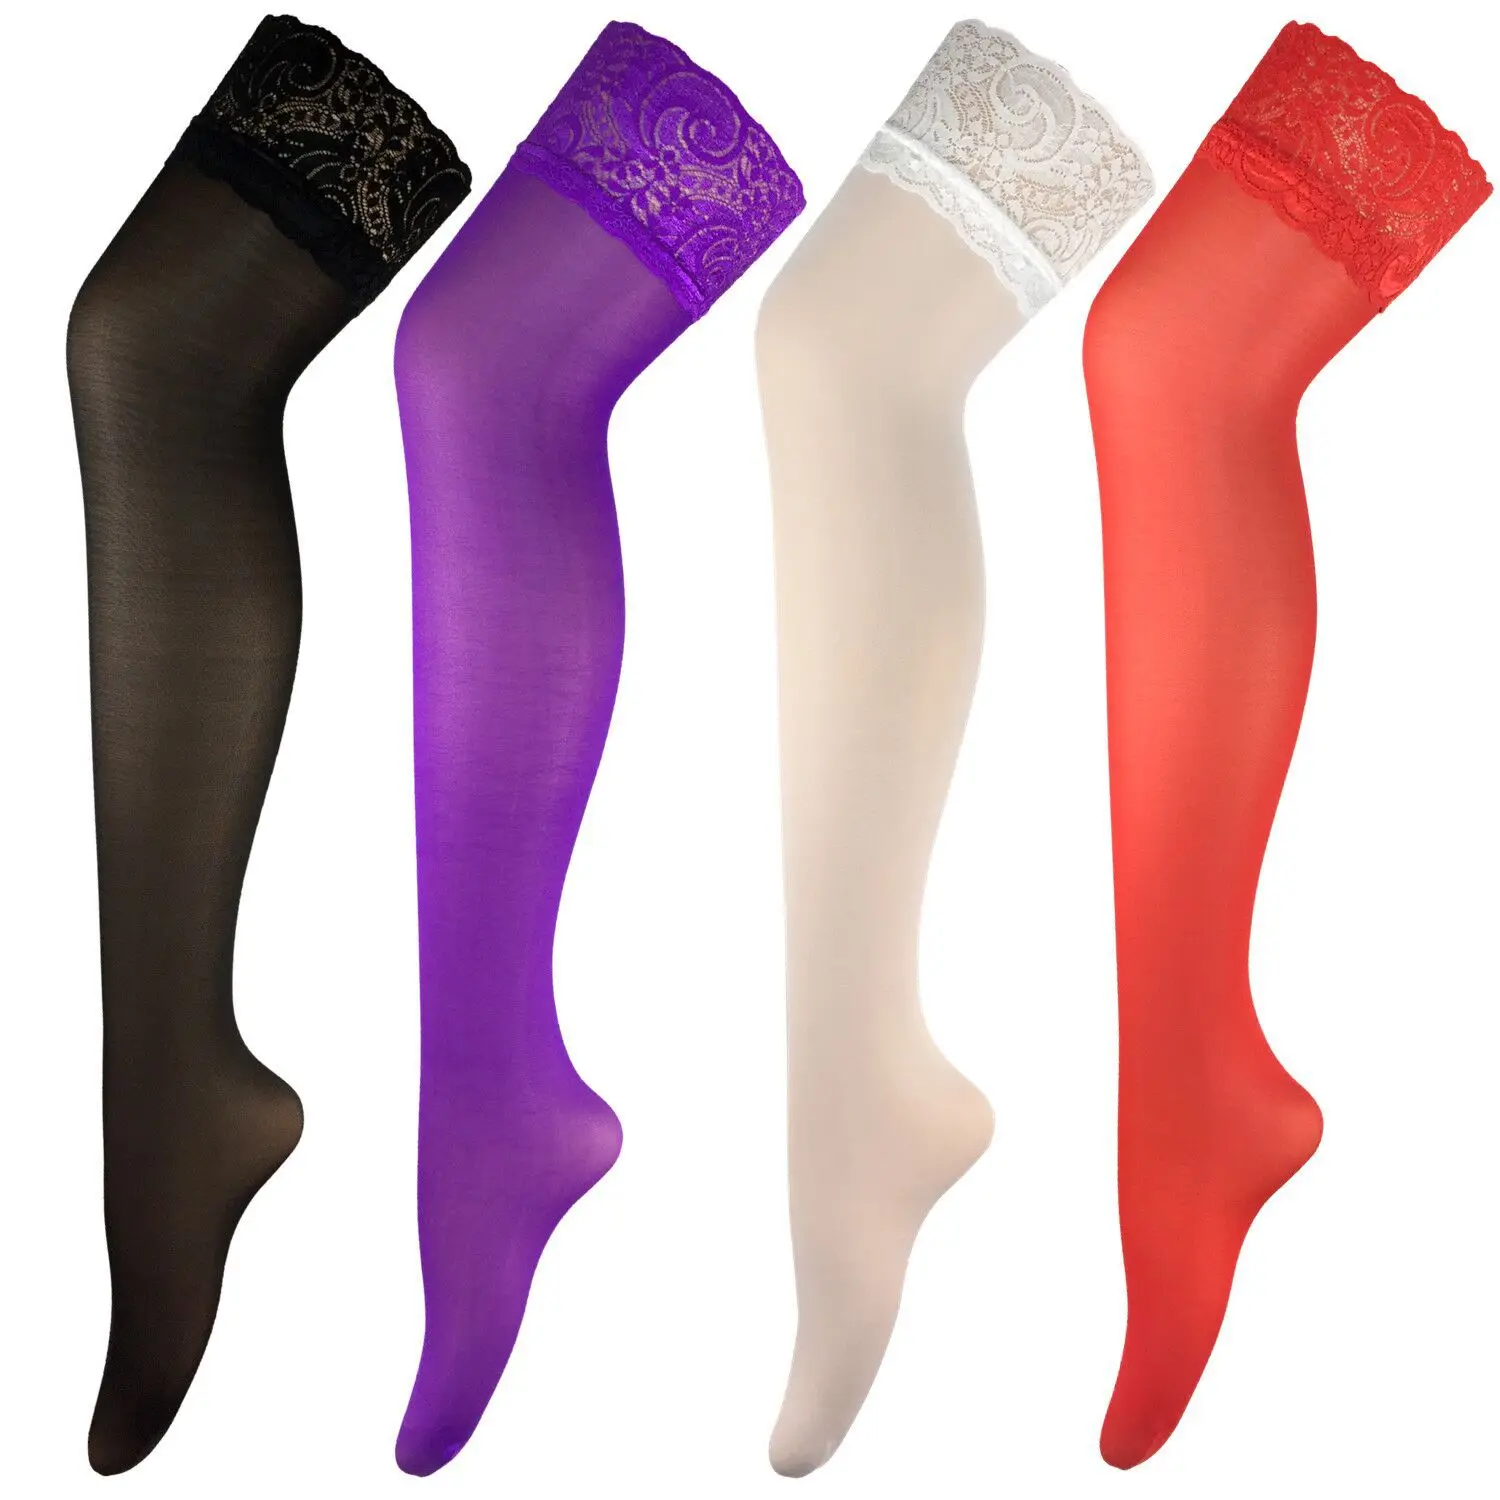 

Women Sheer Sexy Stockings Over The Knee Socks Nightclubs Pantyhose Lace Top Thigh High Stockings, Colors